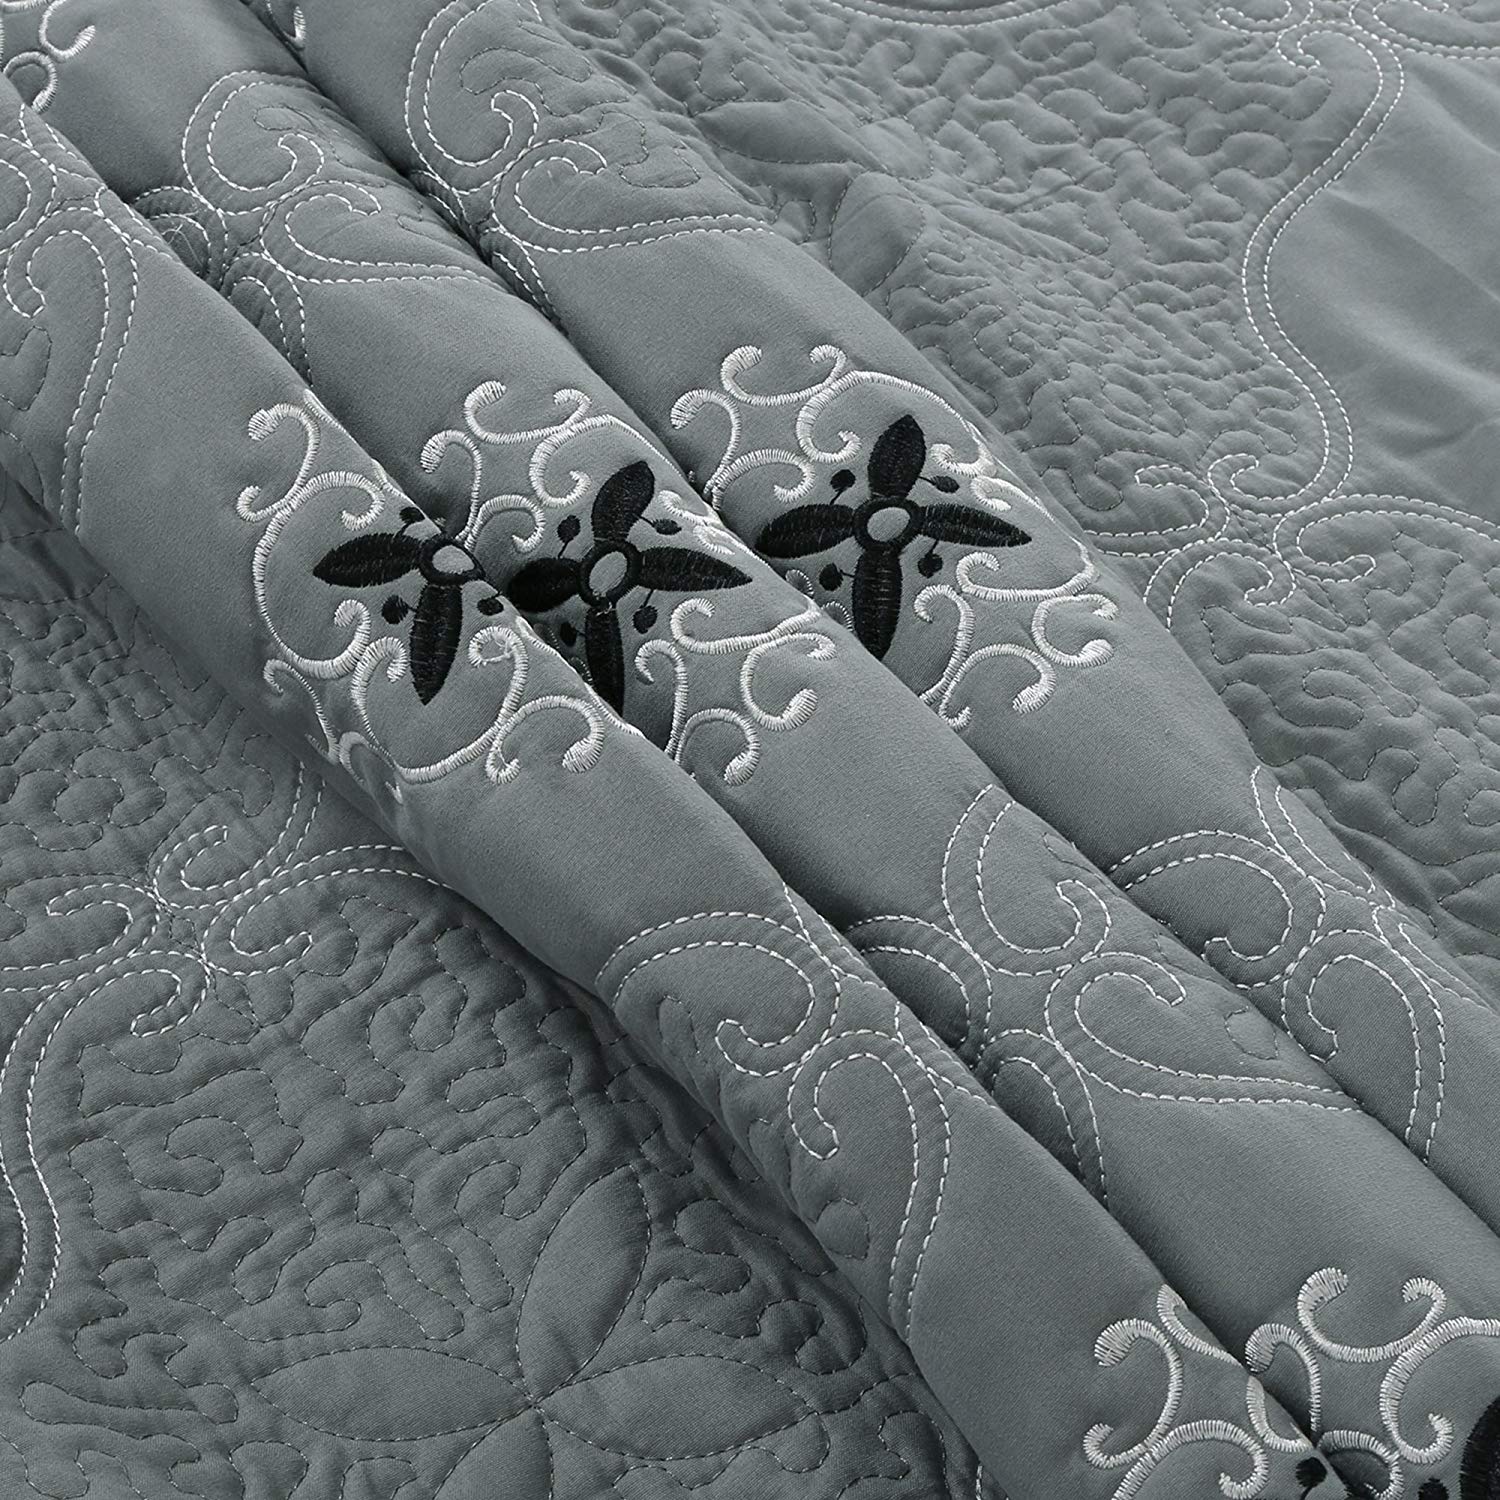 3-Piece Fully Quilted Embroidery Quilts Bedspreads Bed Coverlets Cover Set Emma